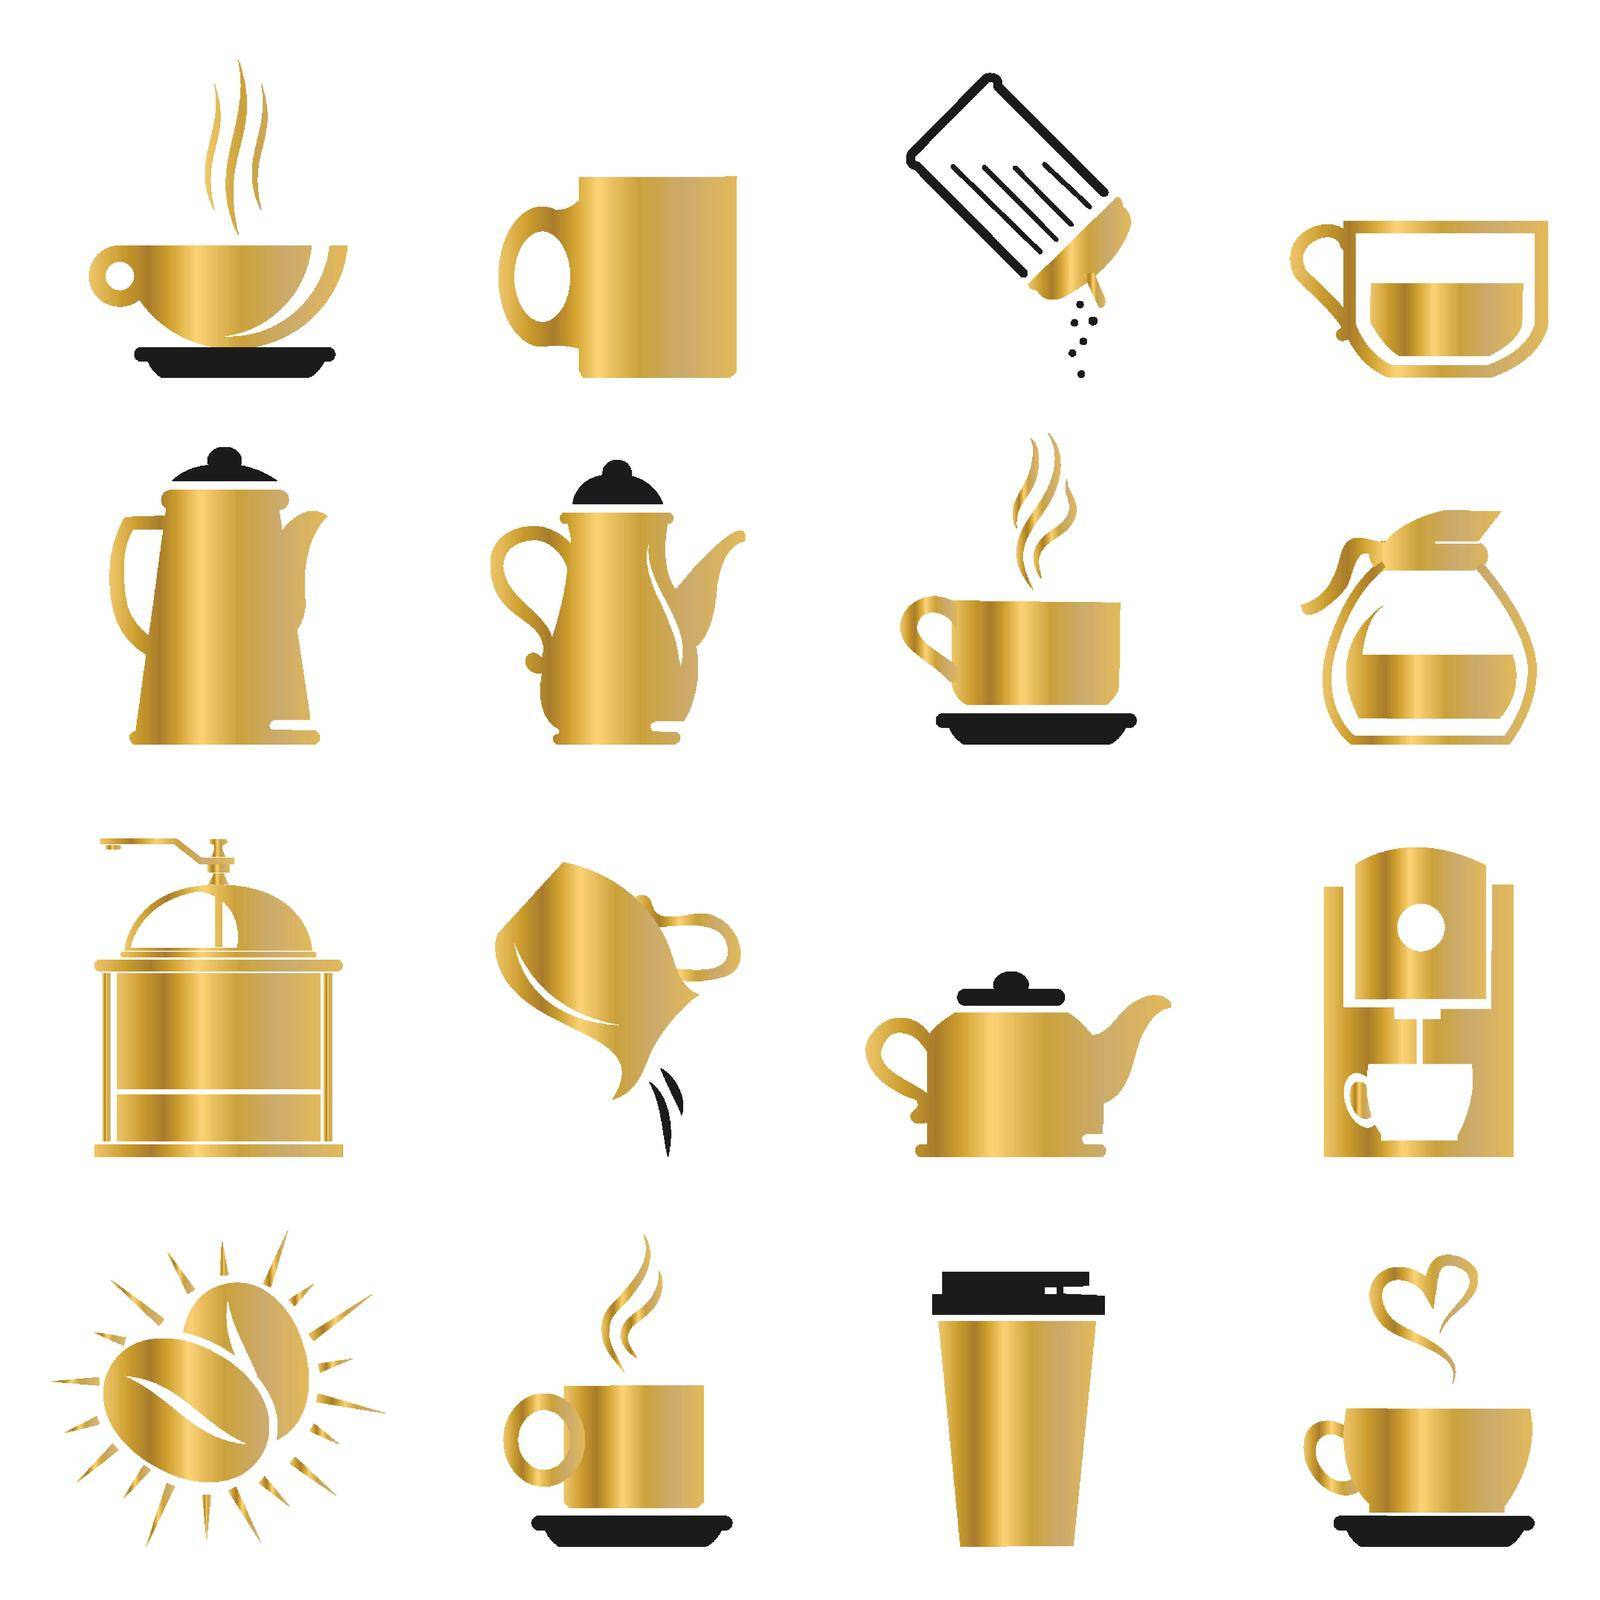 you can use Set of coffee shop icons to design banners, posters, backgrounds, ...etc.